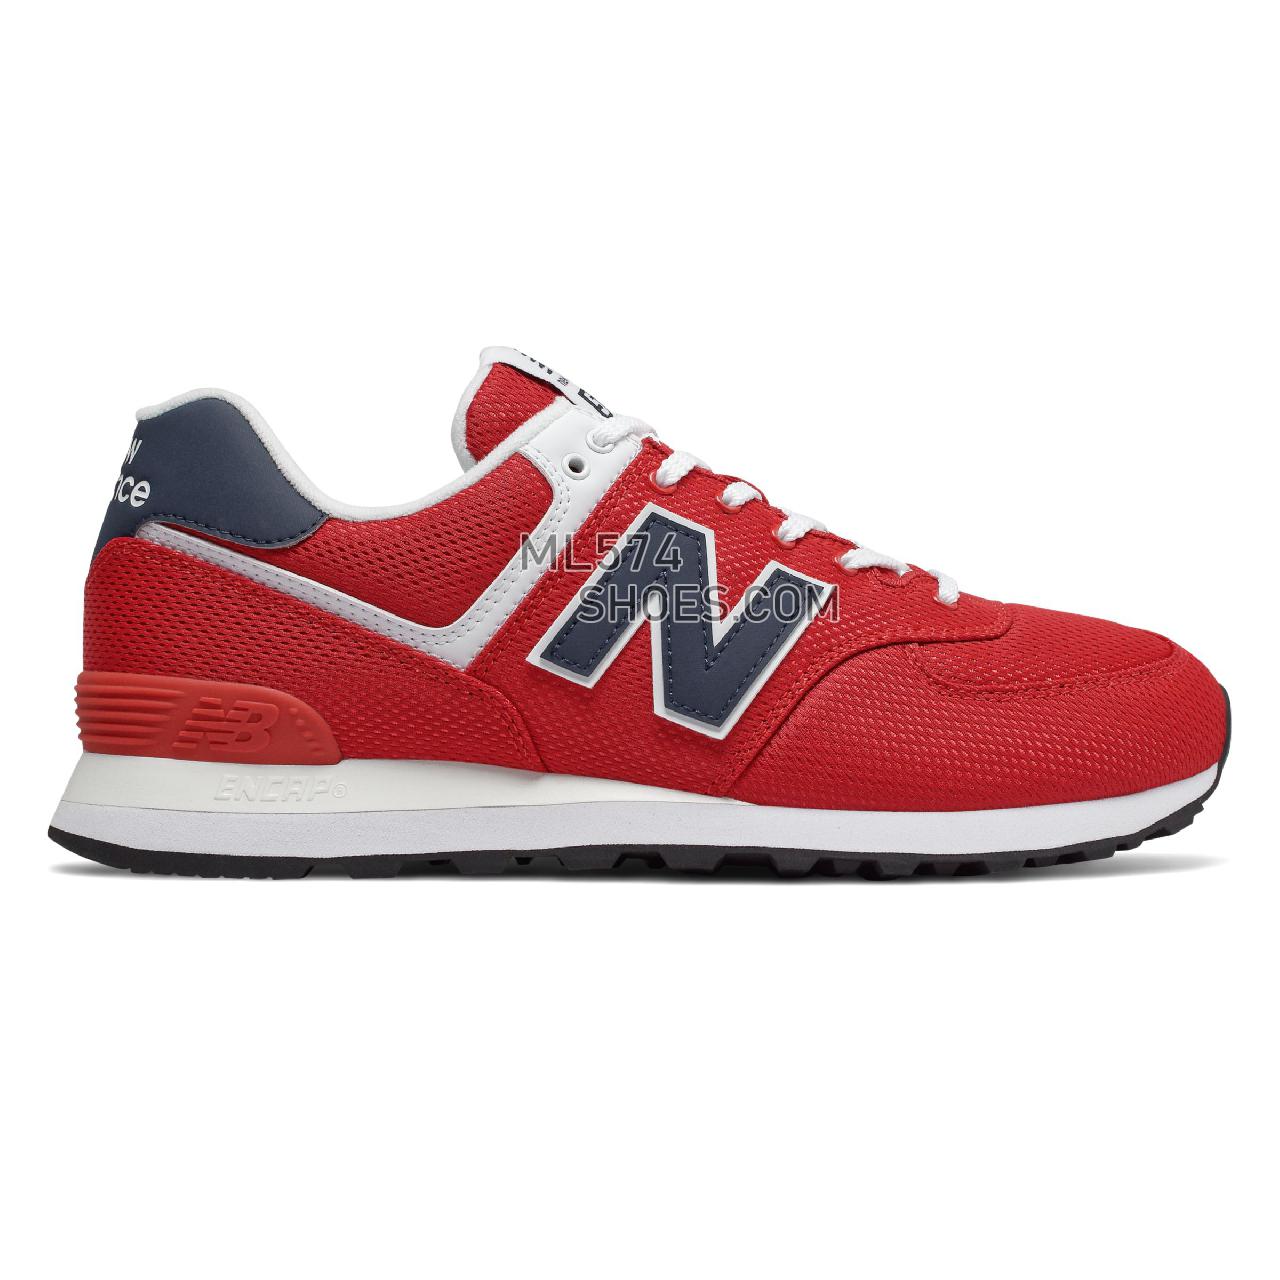 New Balance 574 - Men's Classic Sneakers - Team Red with Natural Indigo - ML574SCH